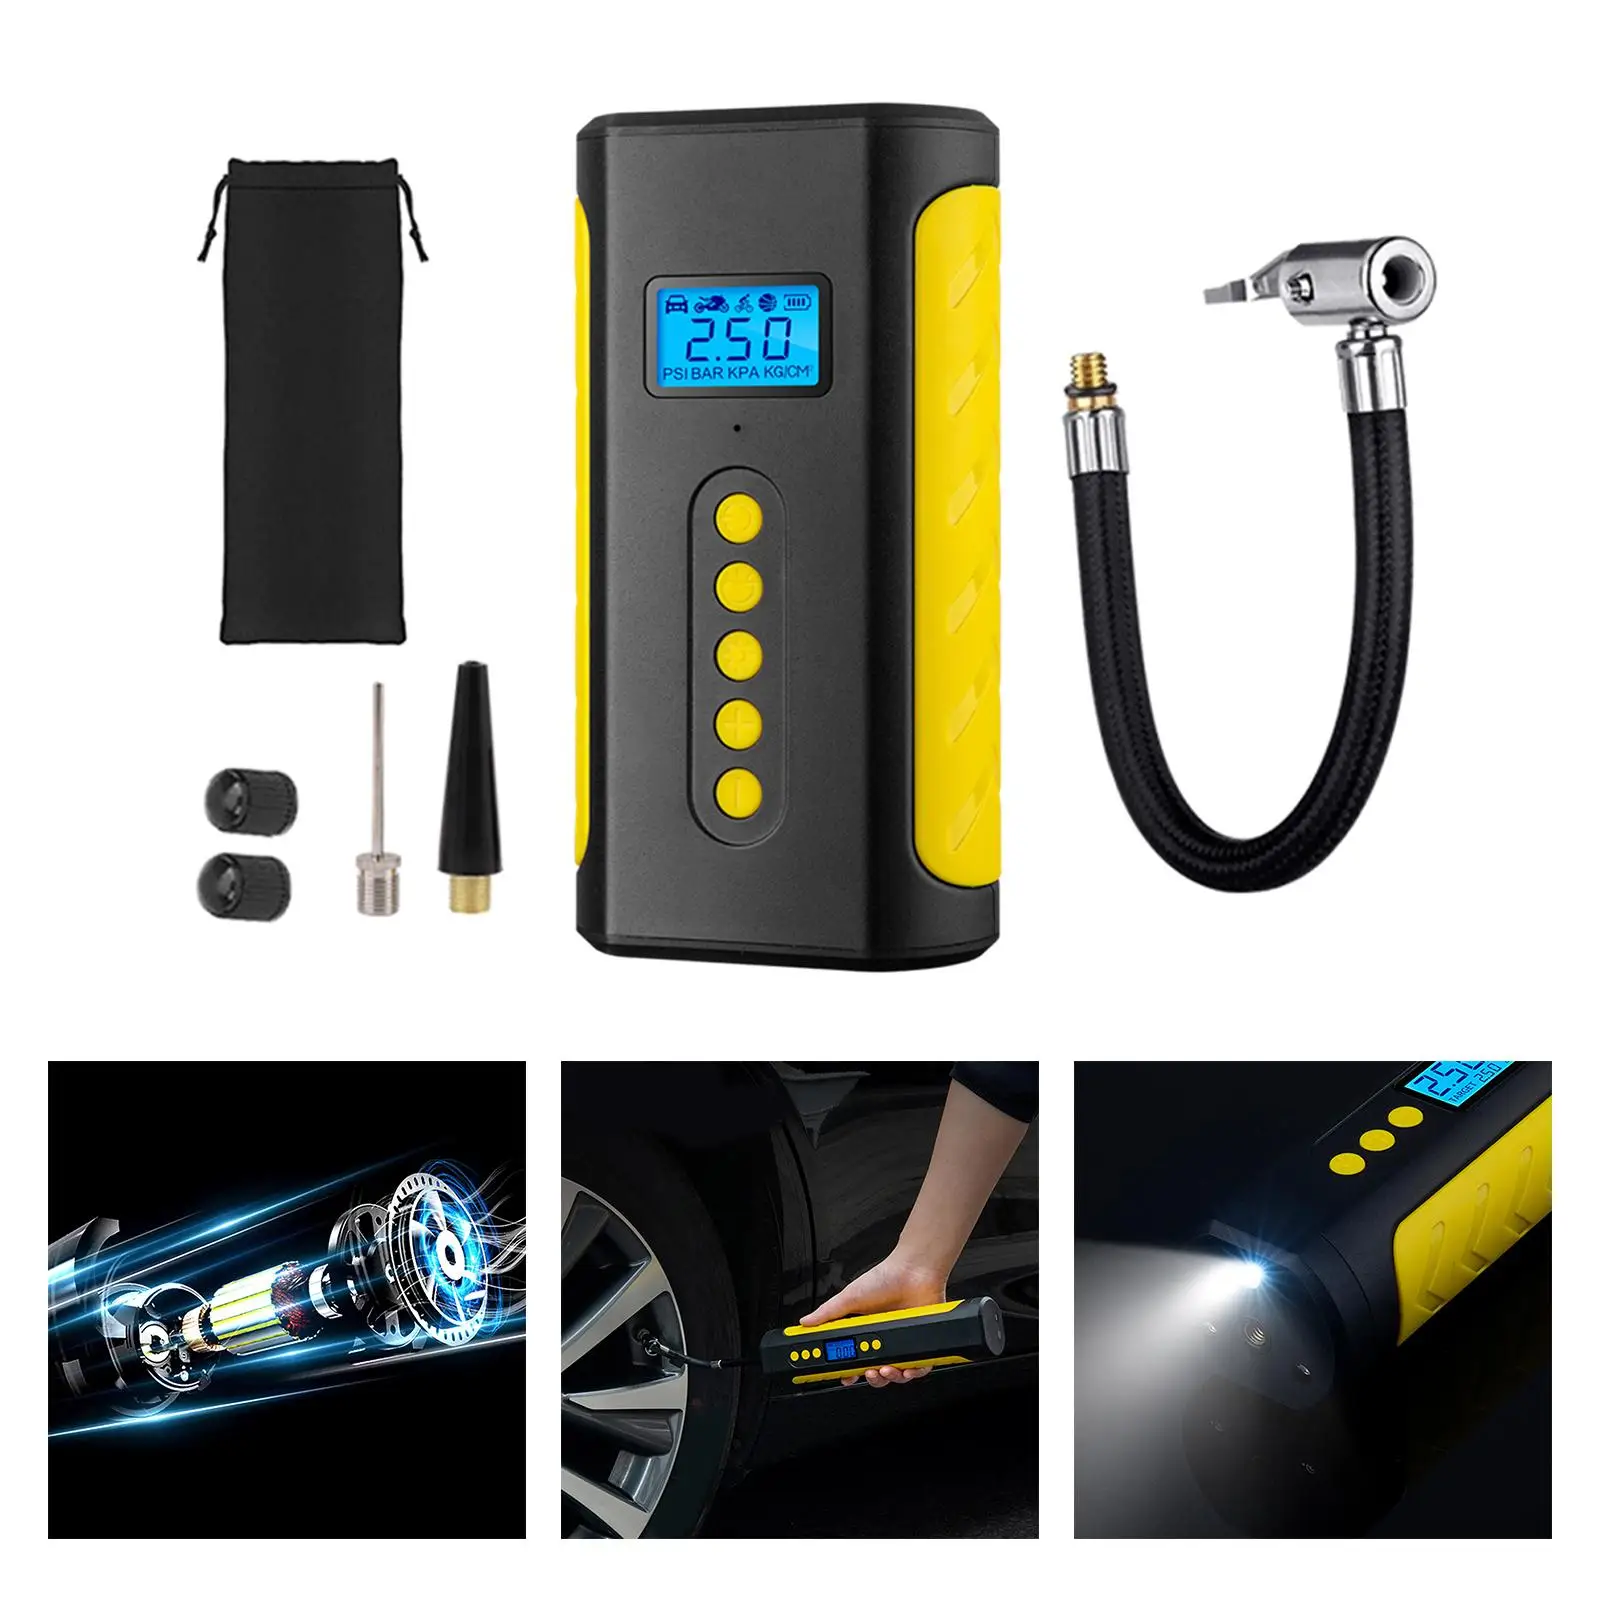 Portable Air Compressor Fast Inflation Handheld Tire Inflator for